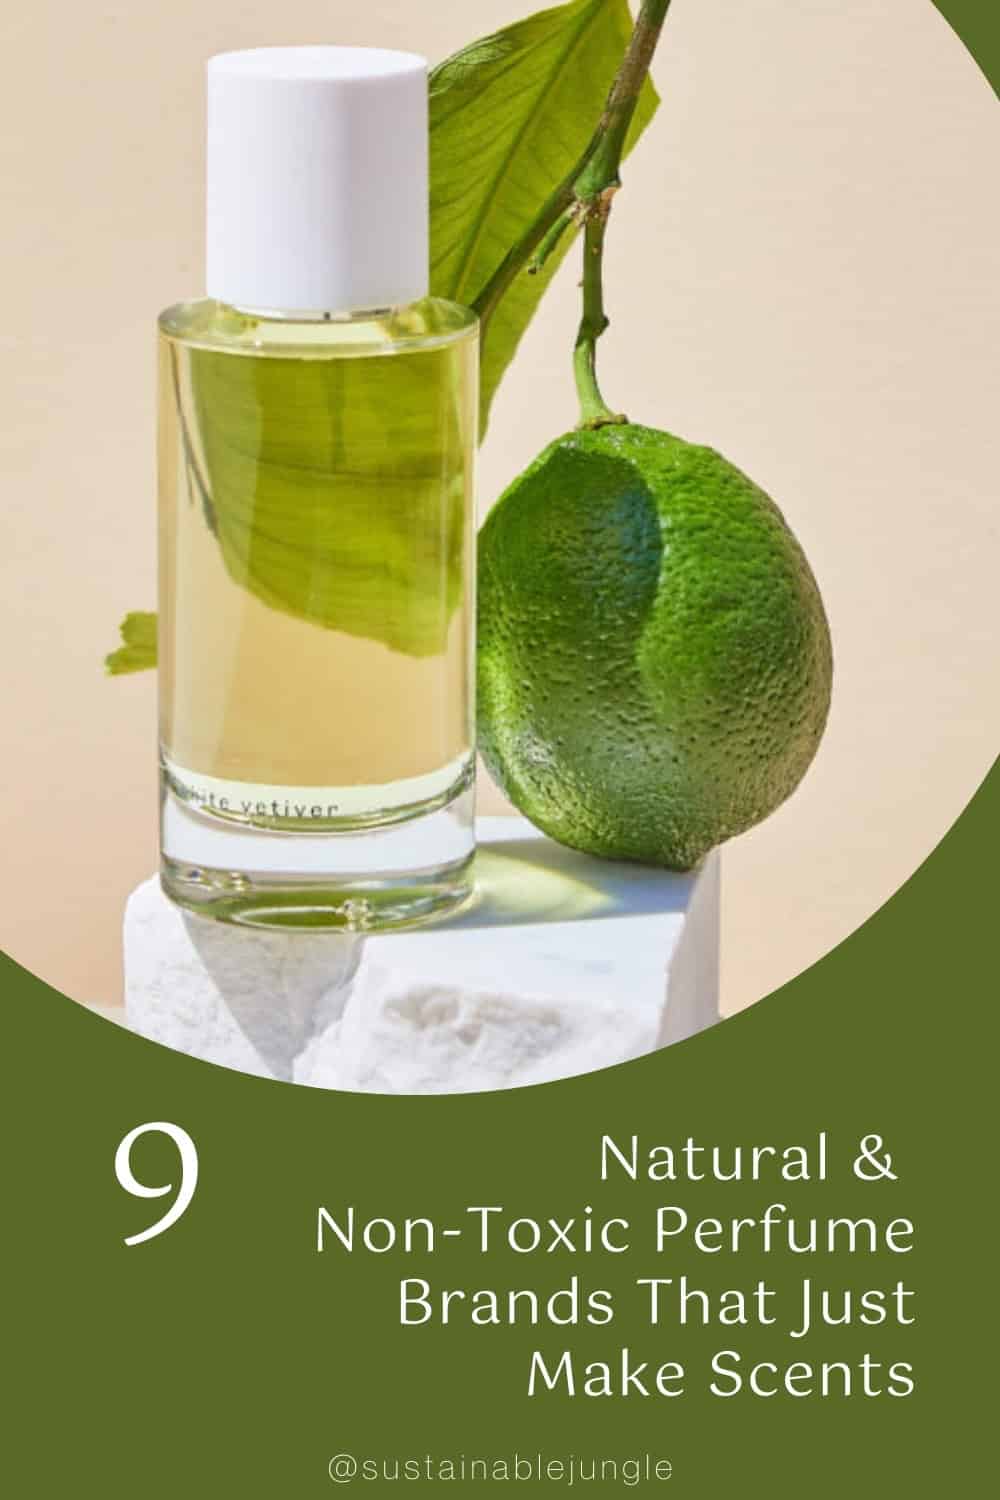 9 Non-Toxic Perfume Brands For Safe & Natural Scents Image by Abel #nontoxicperfume #nontoxicfragrance #nontoxicperfumebrands #naturalperfume #naturalorganicperfume #sustainablejungle